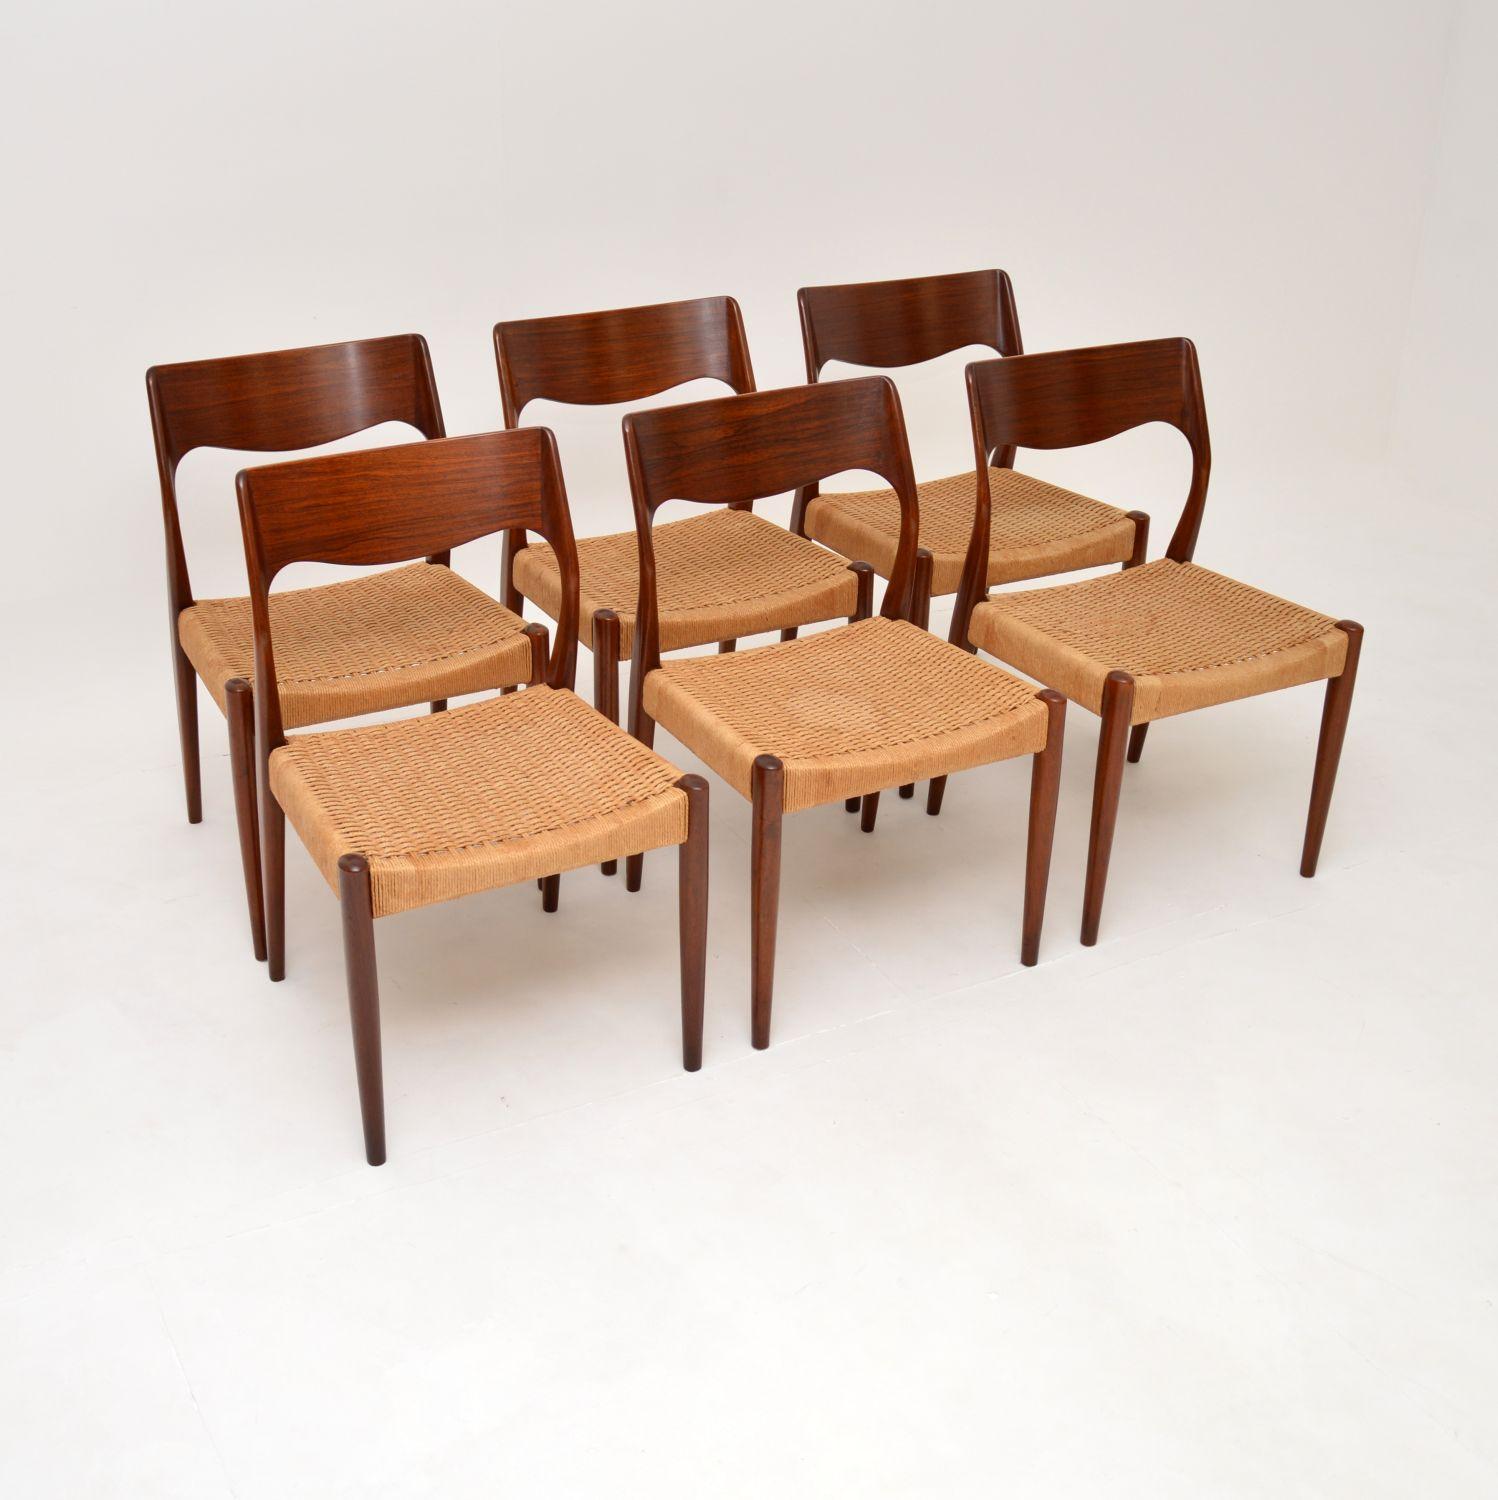 A stunning set of Danish vintage wooden dining chairs with woven paper cord seats. They are attributed to Arne Hovmand-Olsen, they were recently imported from Denmark and date from the 1960’s.

The quality is outstanding, they have beautifully